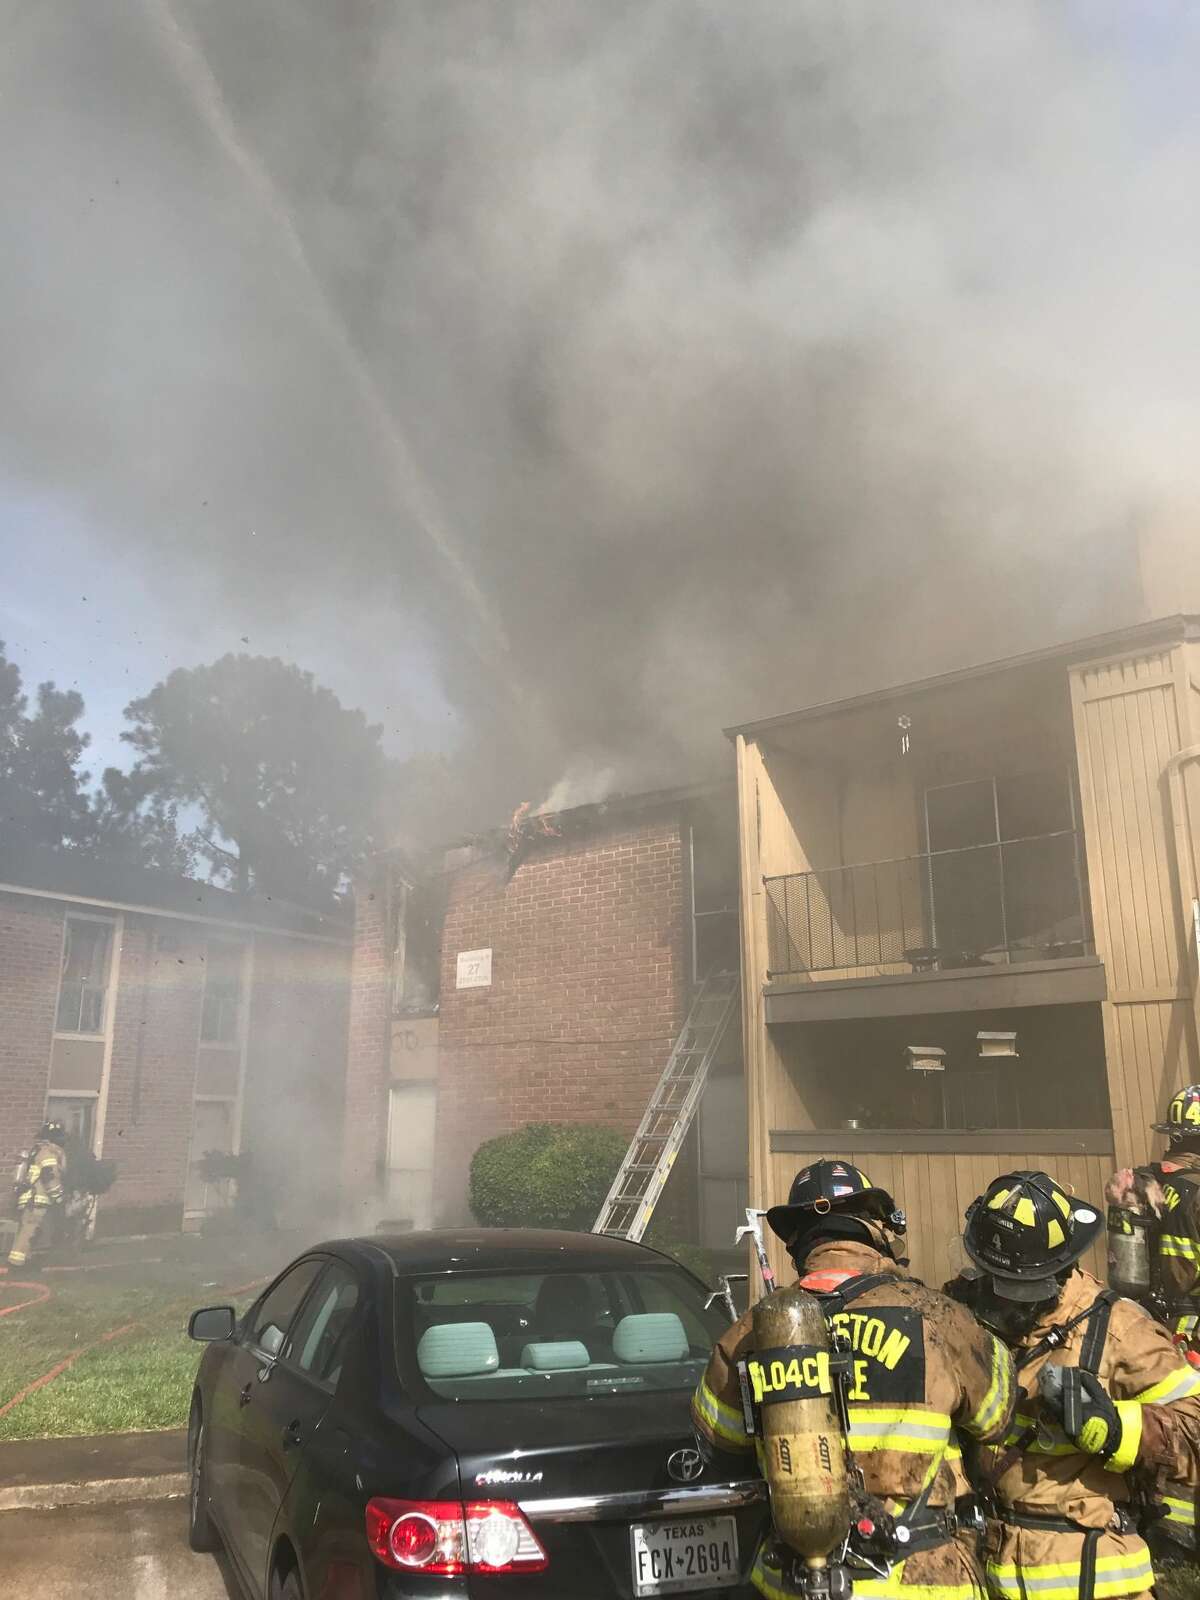 Ten families were displaced Thursday following an apartment fire in the 5800 block of North Houston Rosslyn Road, authorities said.